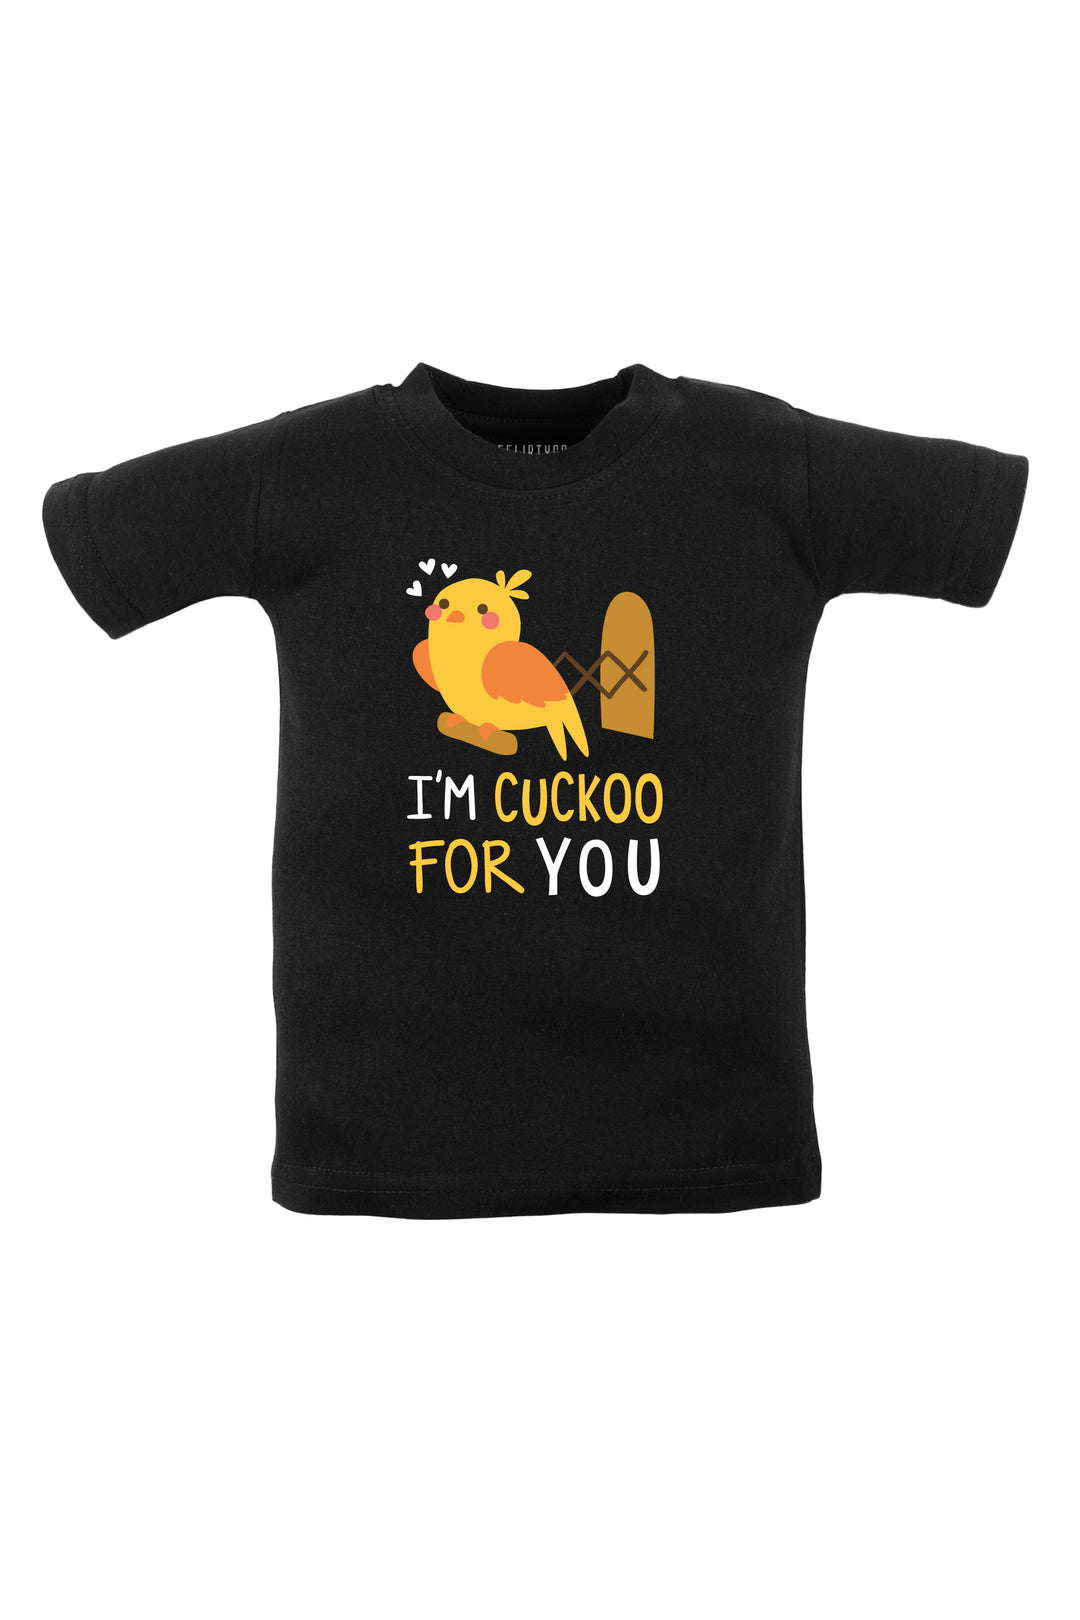 I'M Cuckoo For You Kids T Shirt